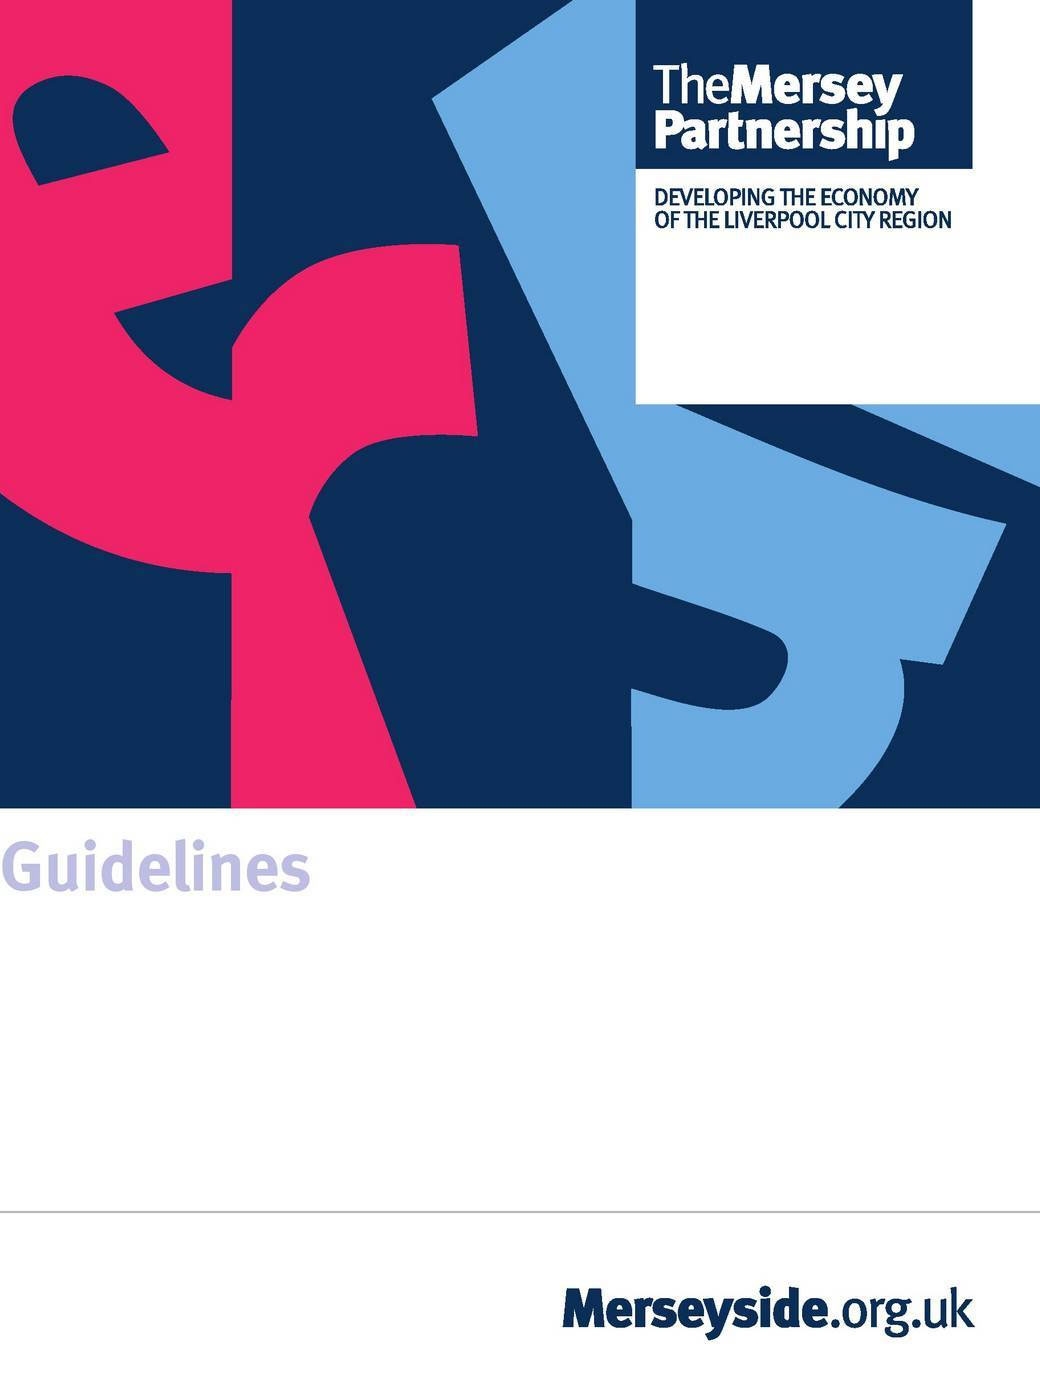 The Mersey Partnership Brand Guidelines